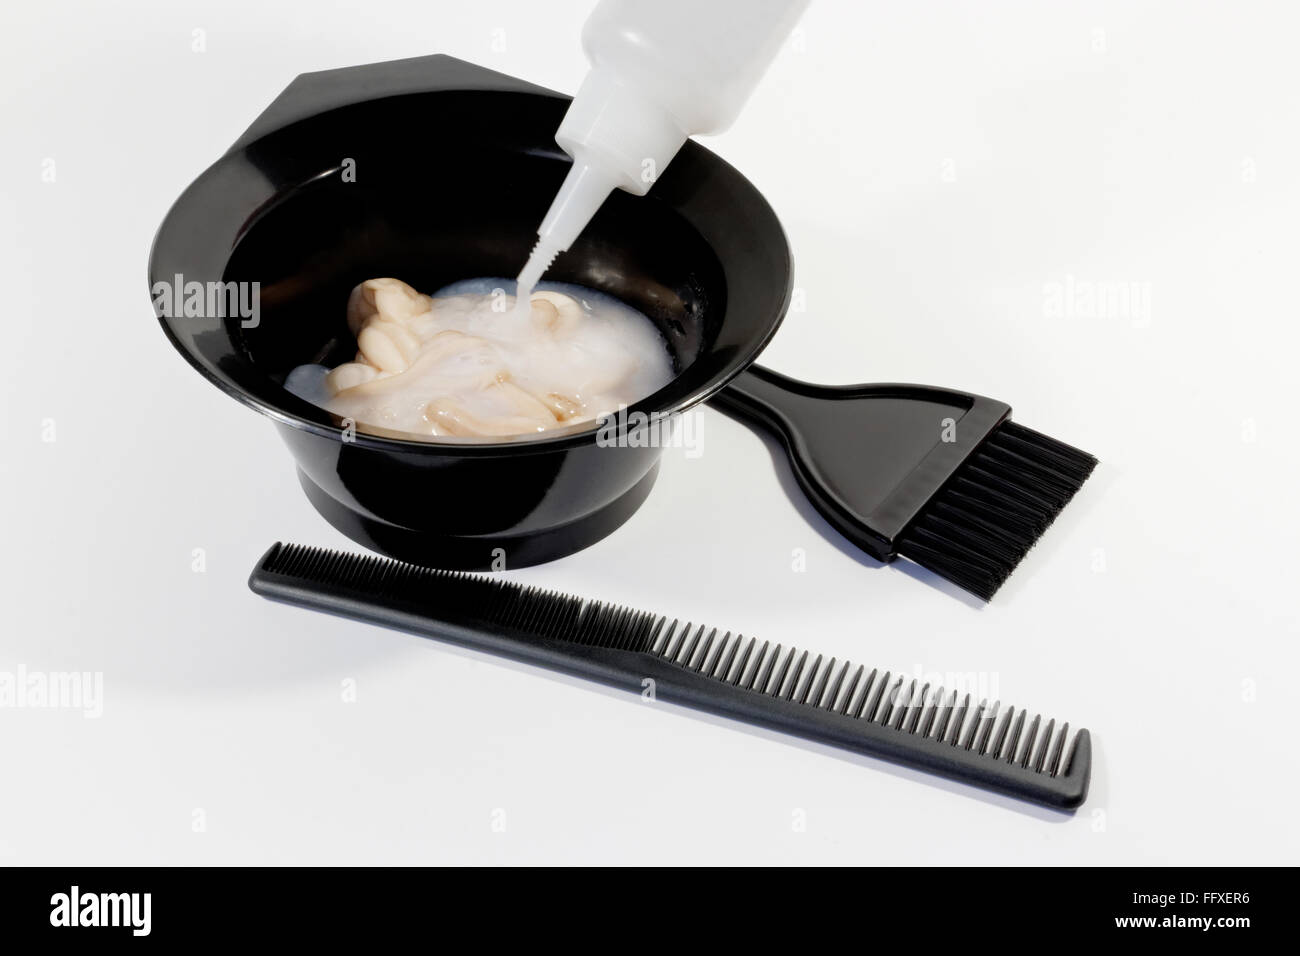 Hair dye measuring and mixing kit. Mixing bowl and hair dye brush on  electronic scale. Hair coloring tools set. Professional instrument for hair  color Stock Photo - Alamy